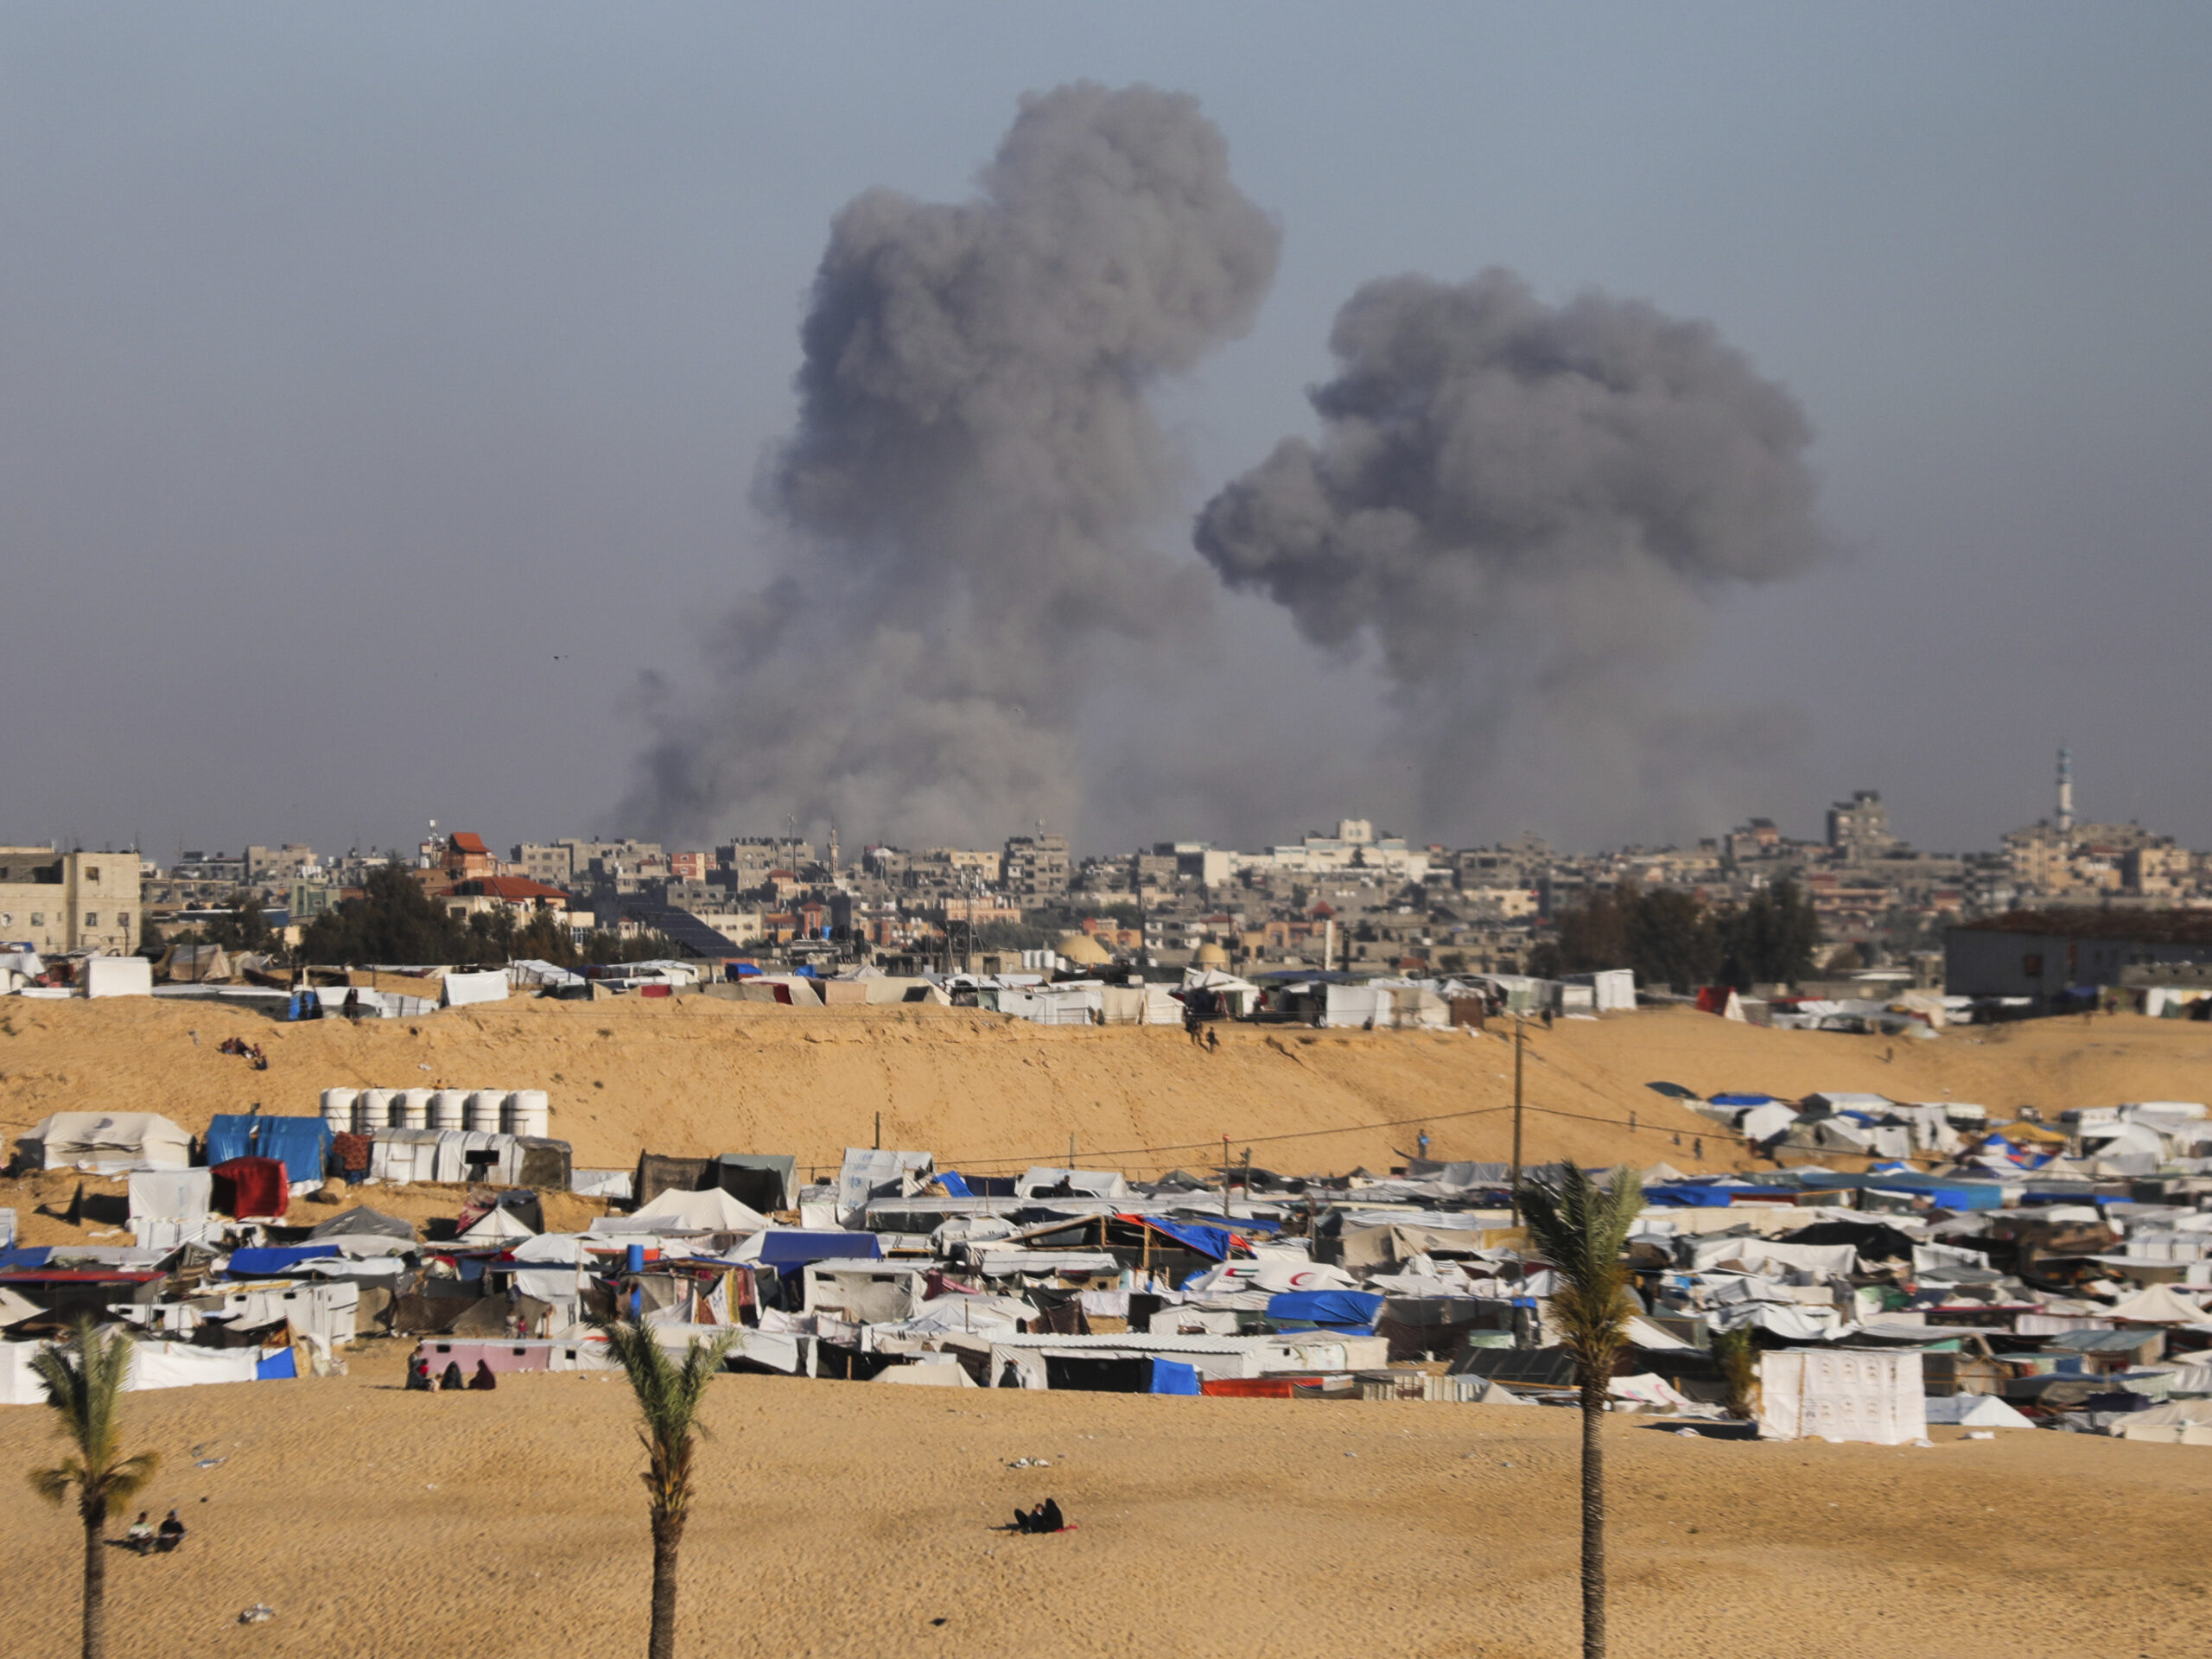 U.S. paused bomb shipment to Israel to signal concerns over Rafah, official says